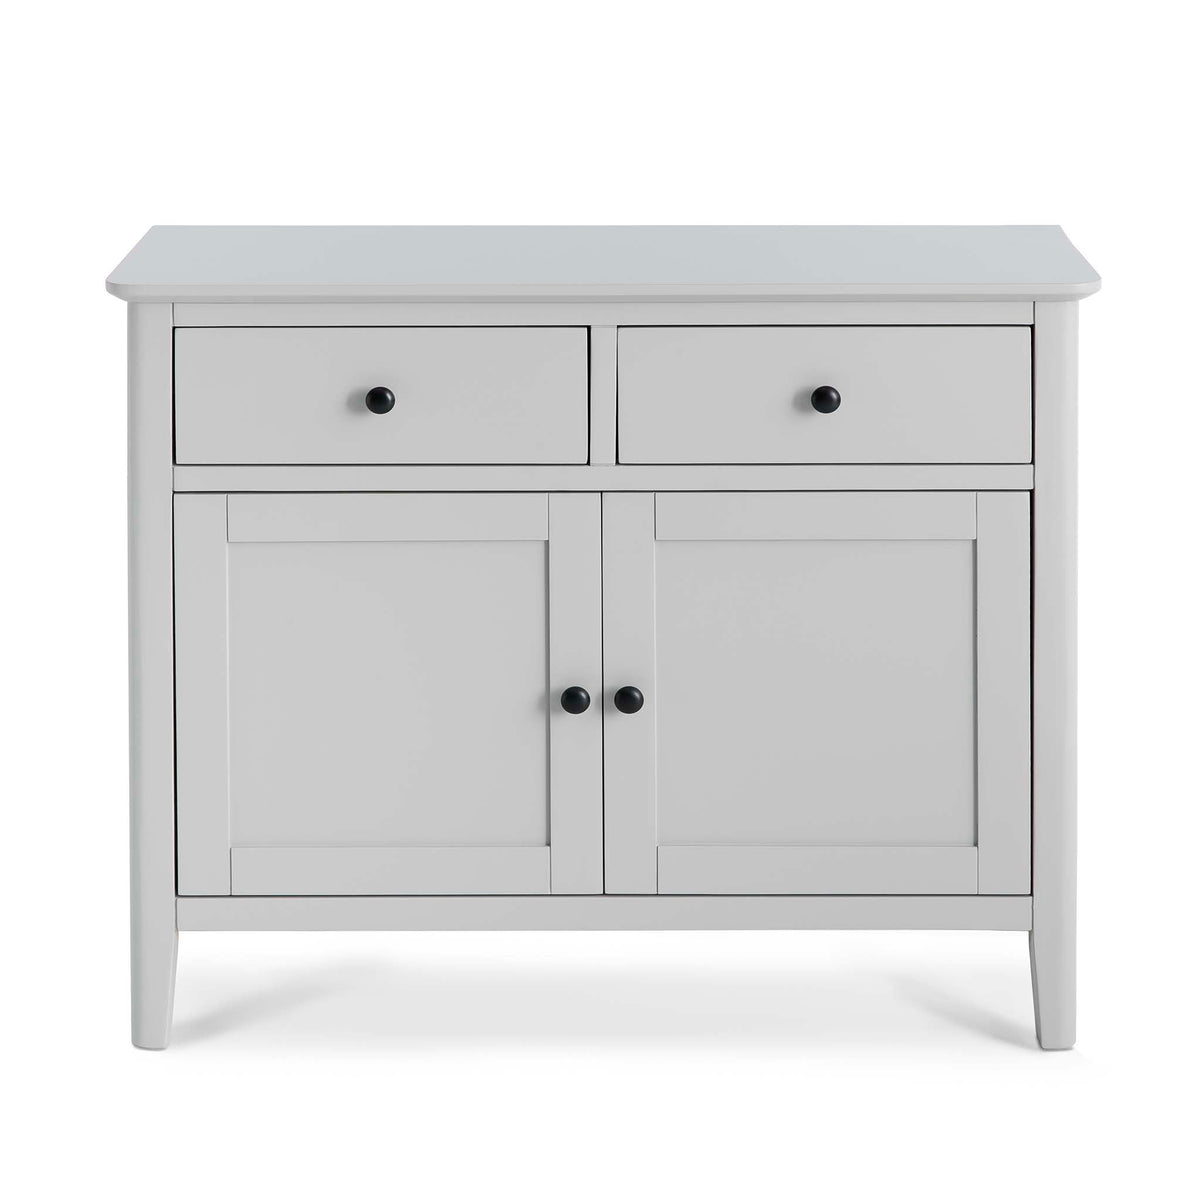 Elgin Grey Small Sideboard - Front view